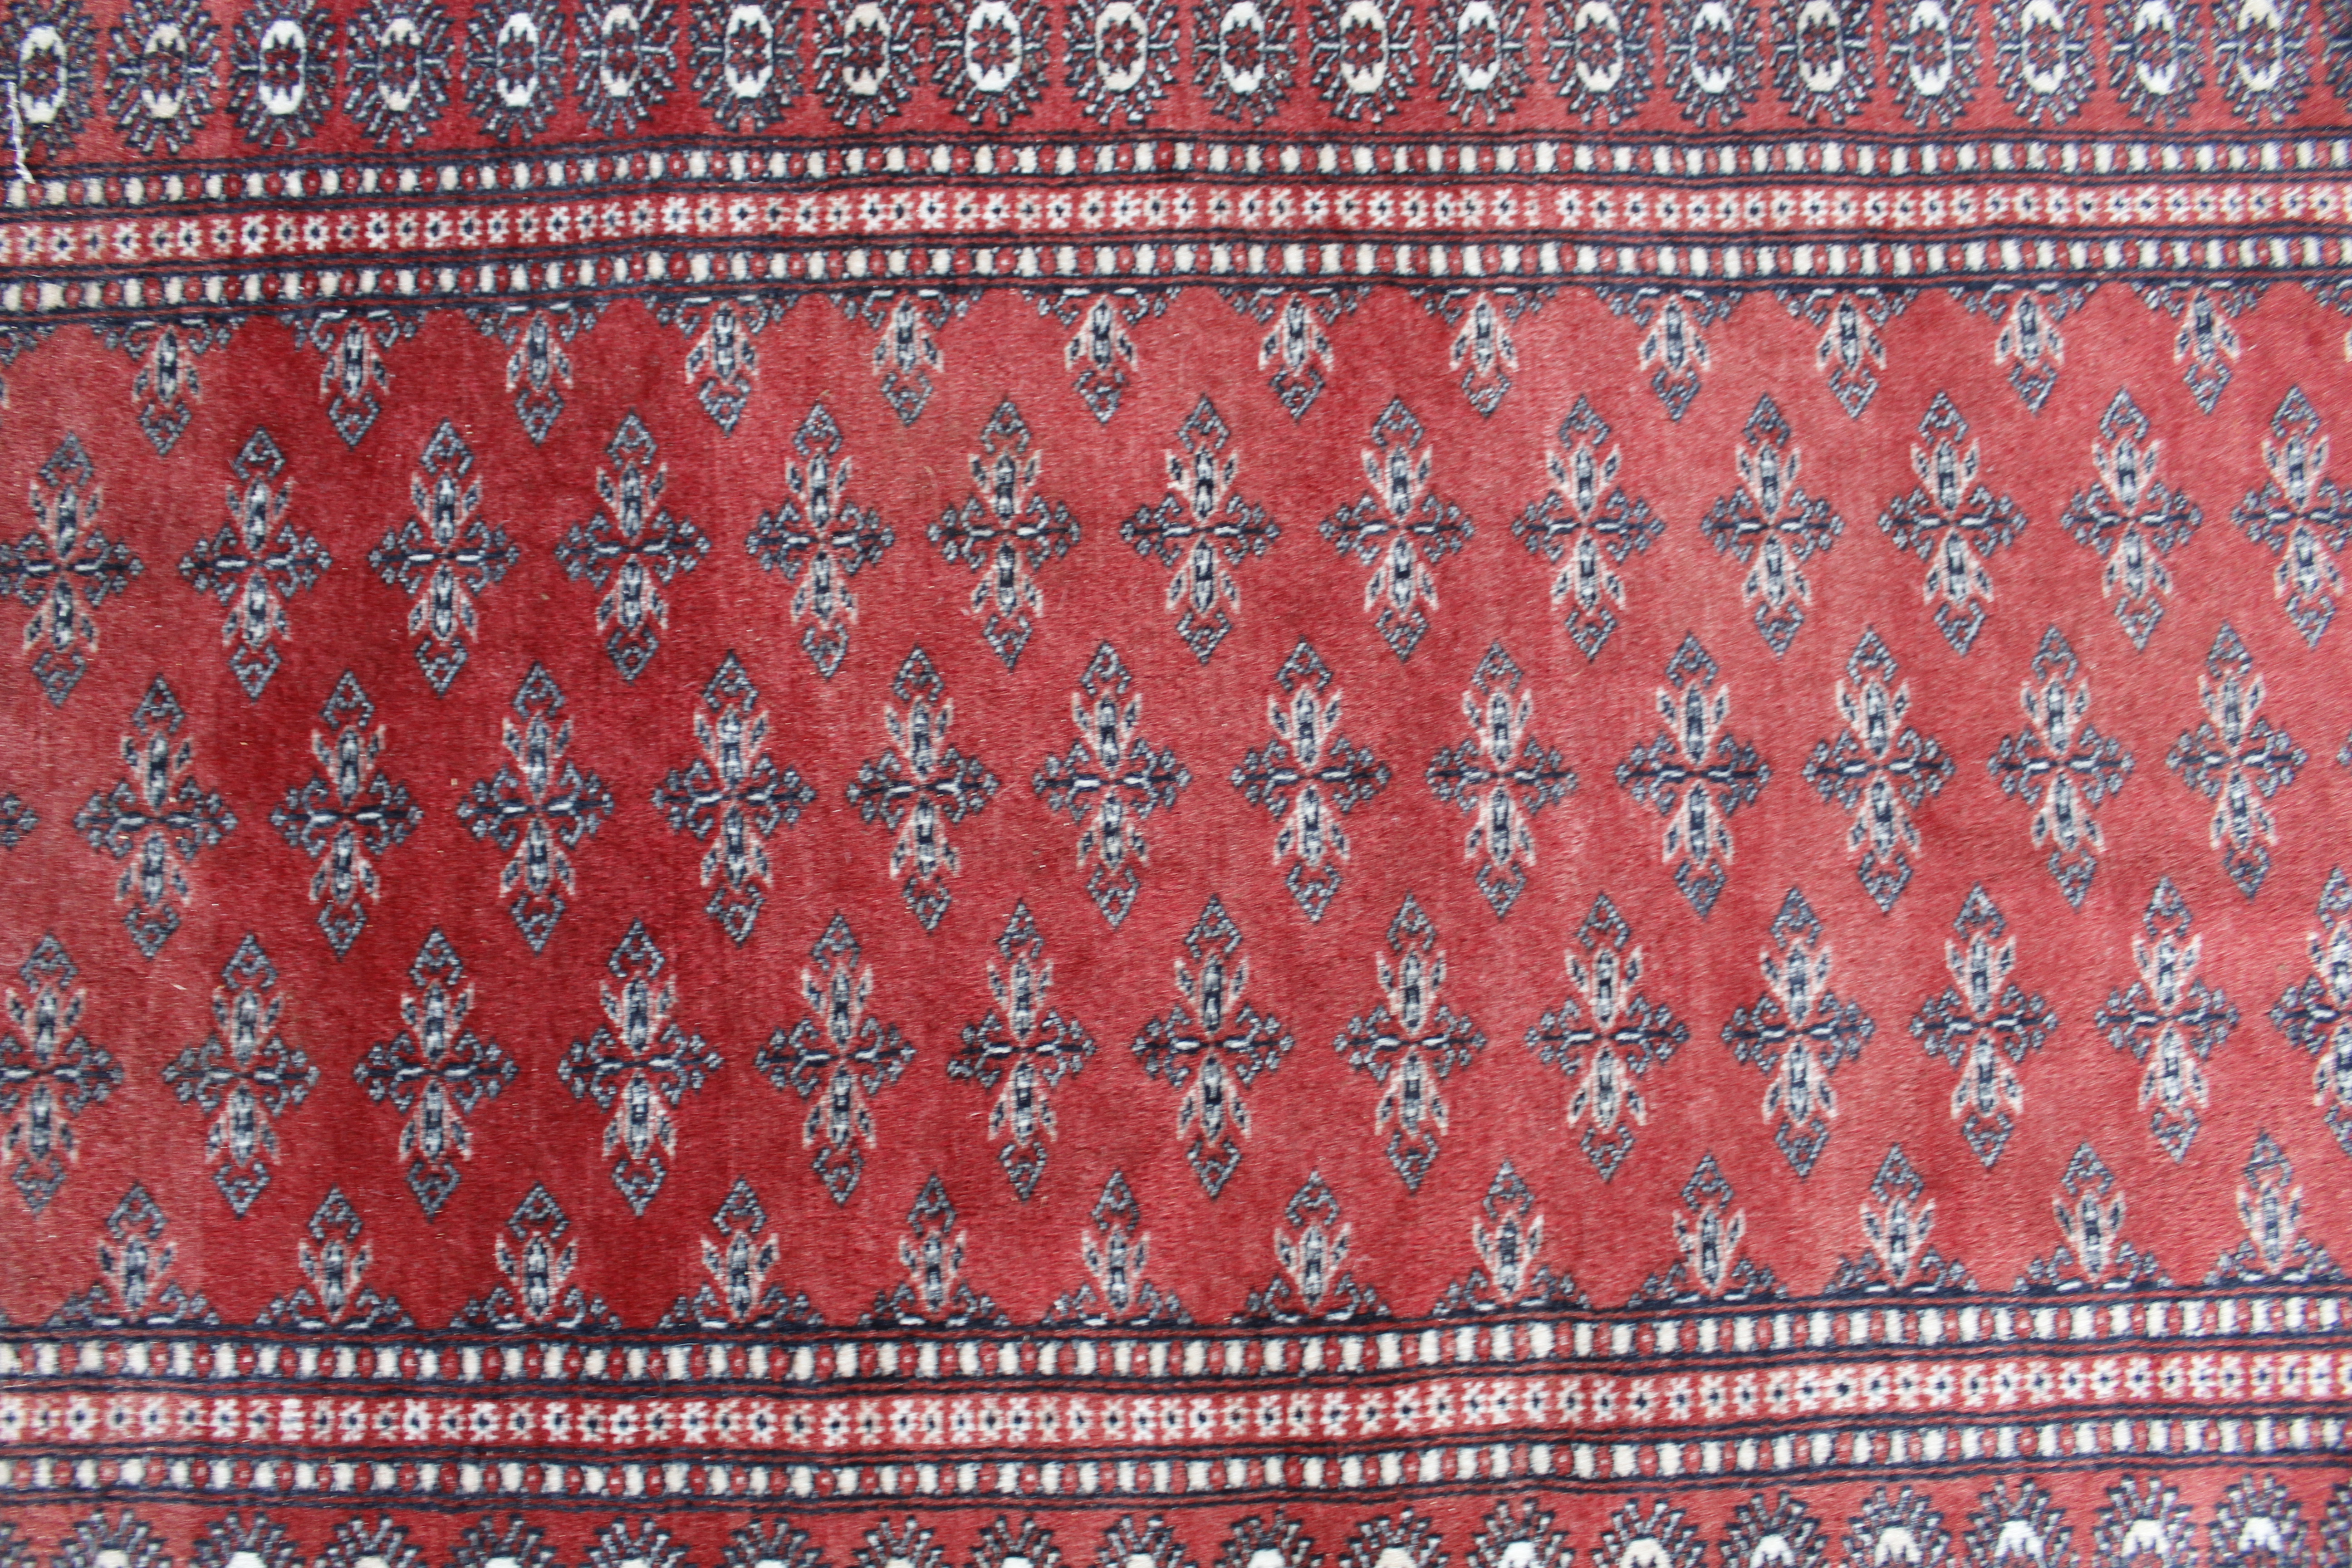 An approx. 5'6" x 3'2" red patterned rug AF - Image 2 of 3